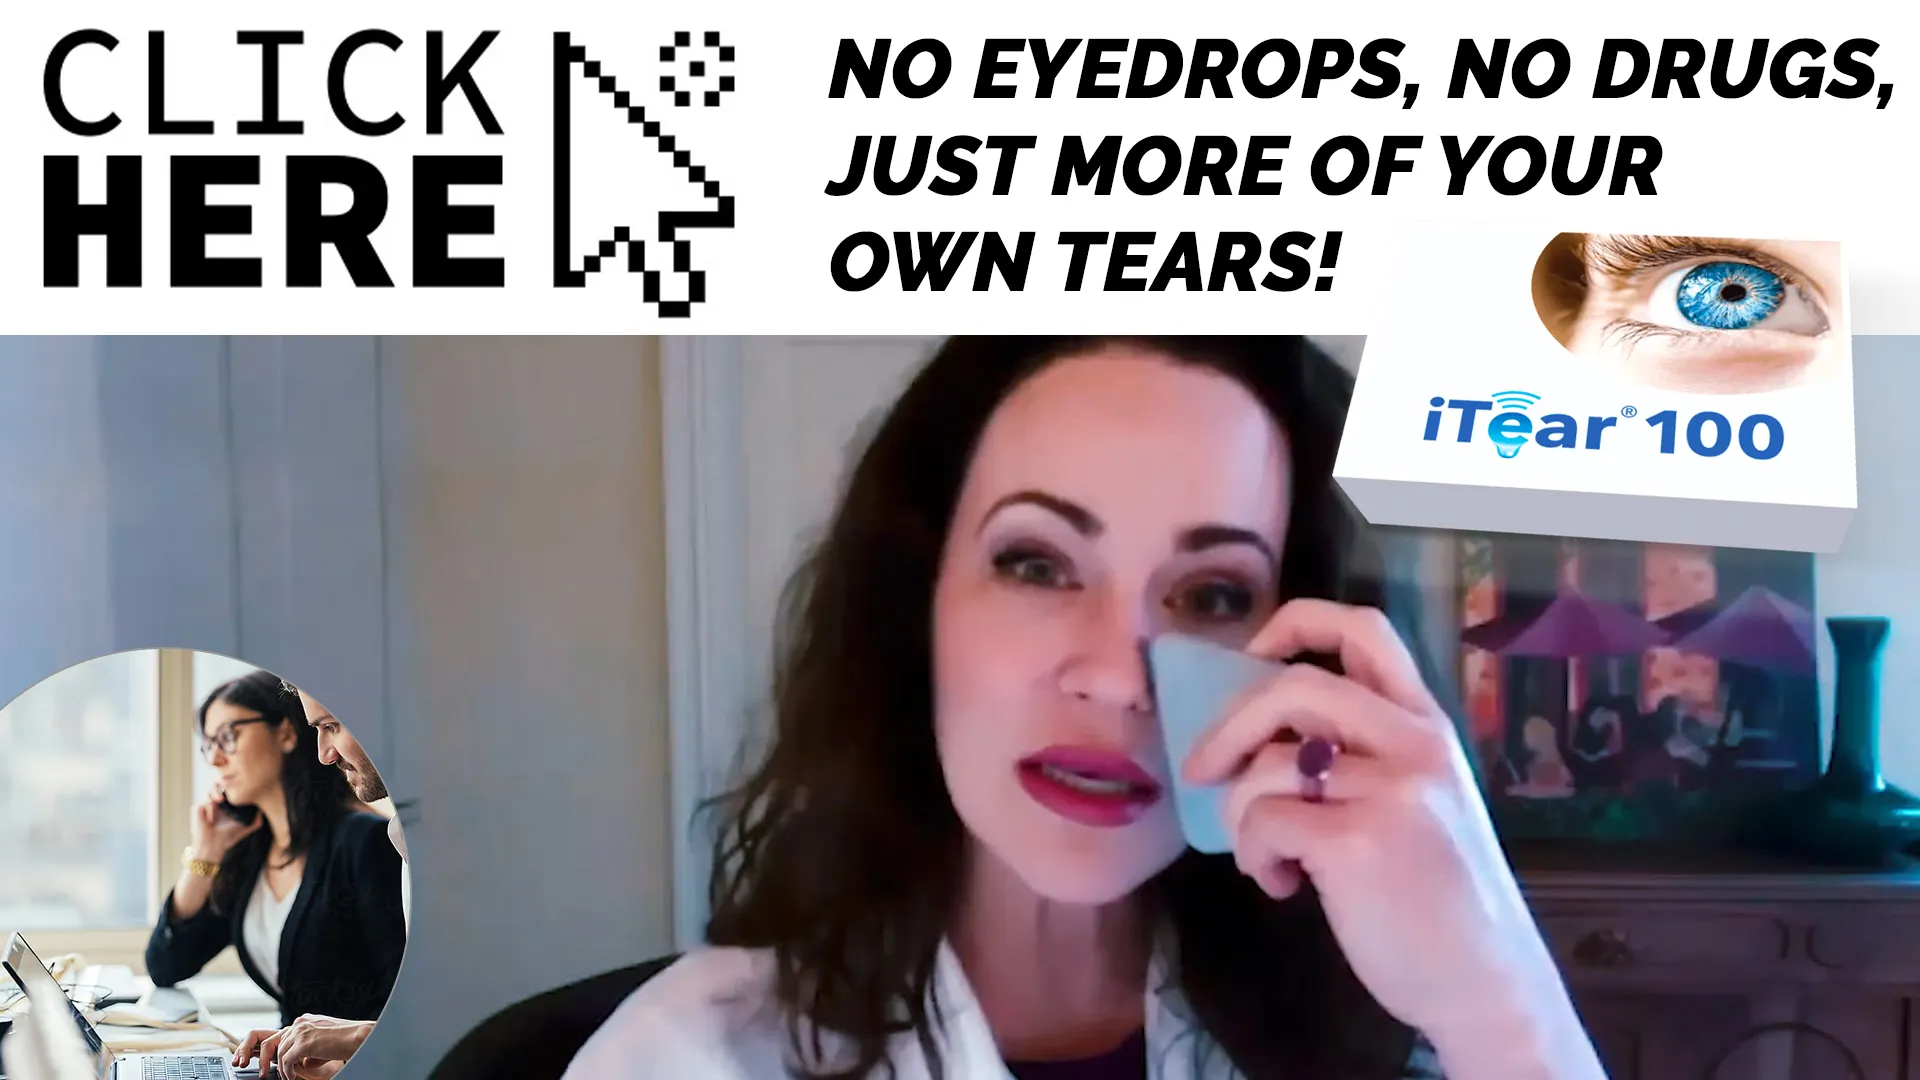 Comparing iTear100 to Other Eye Hydration Solutions